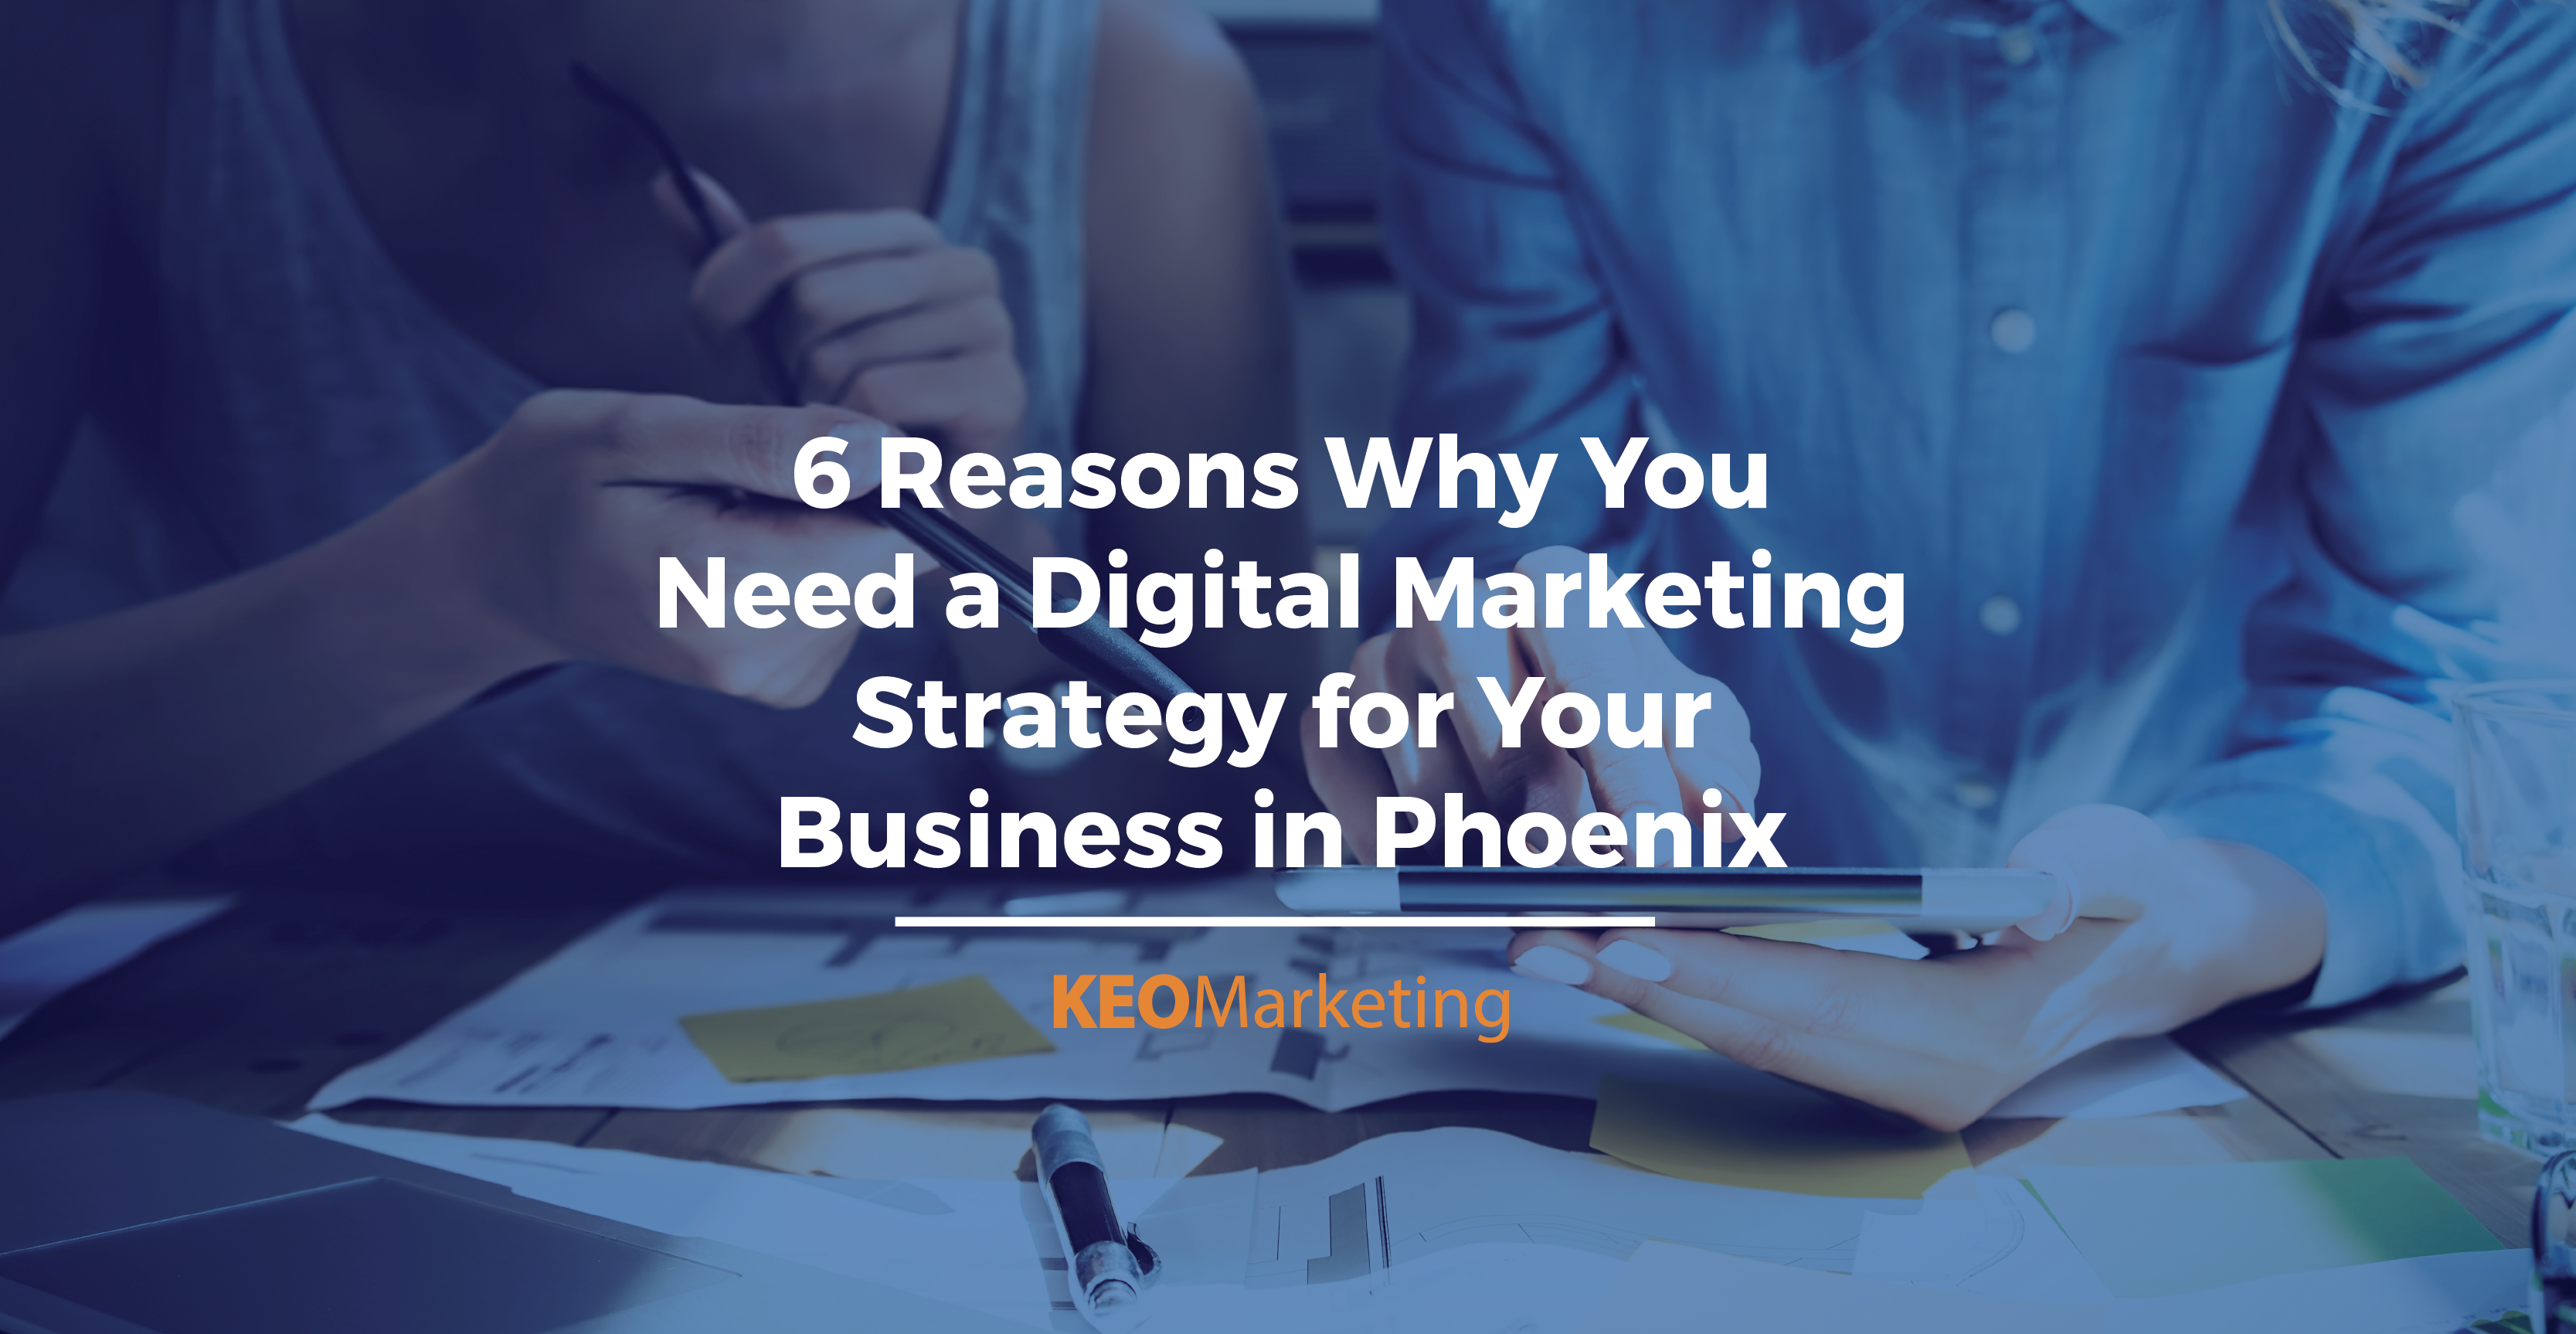 6 Reasons Why You Need a Digital Marketing Strategy for Your Business in Phoenix